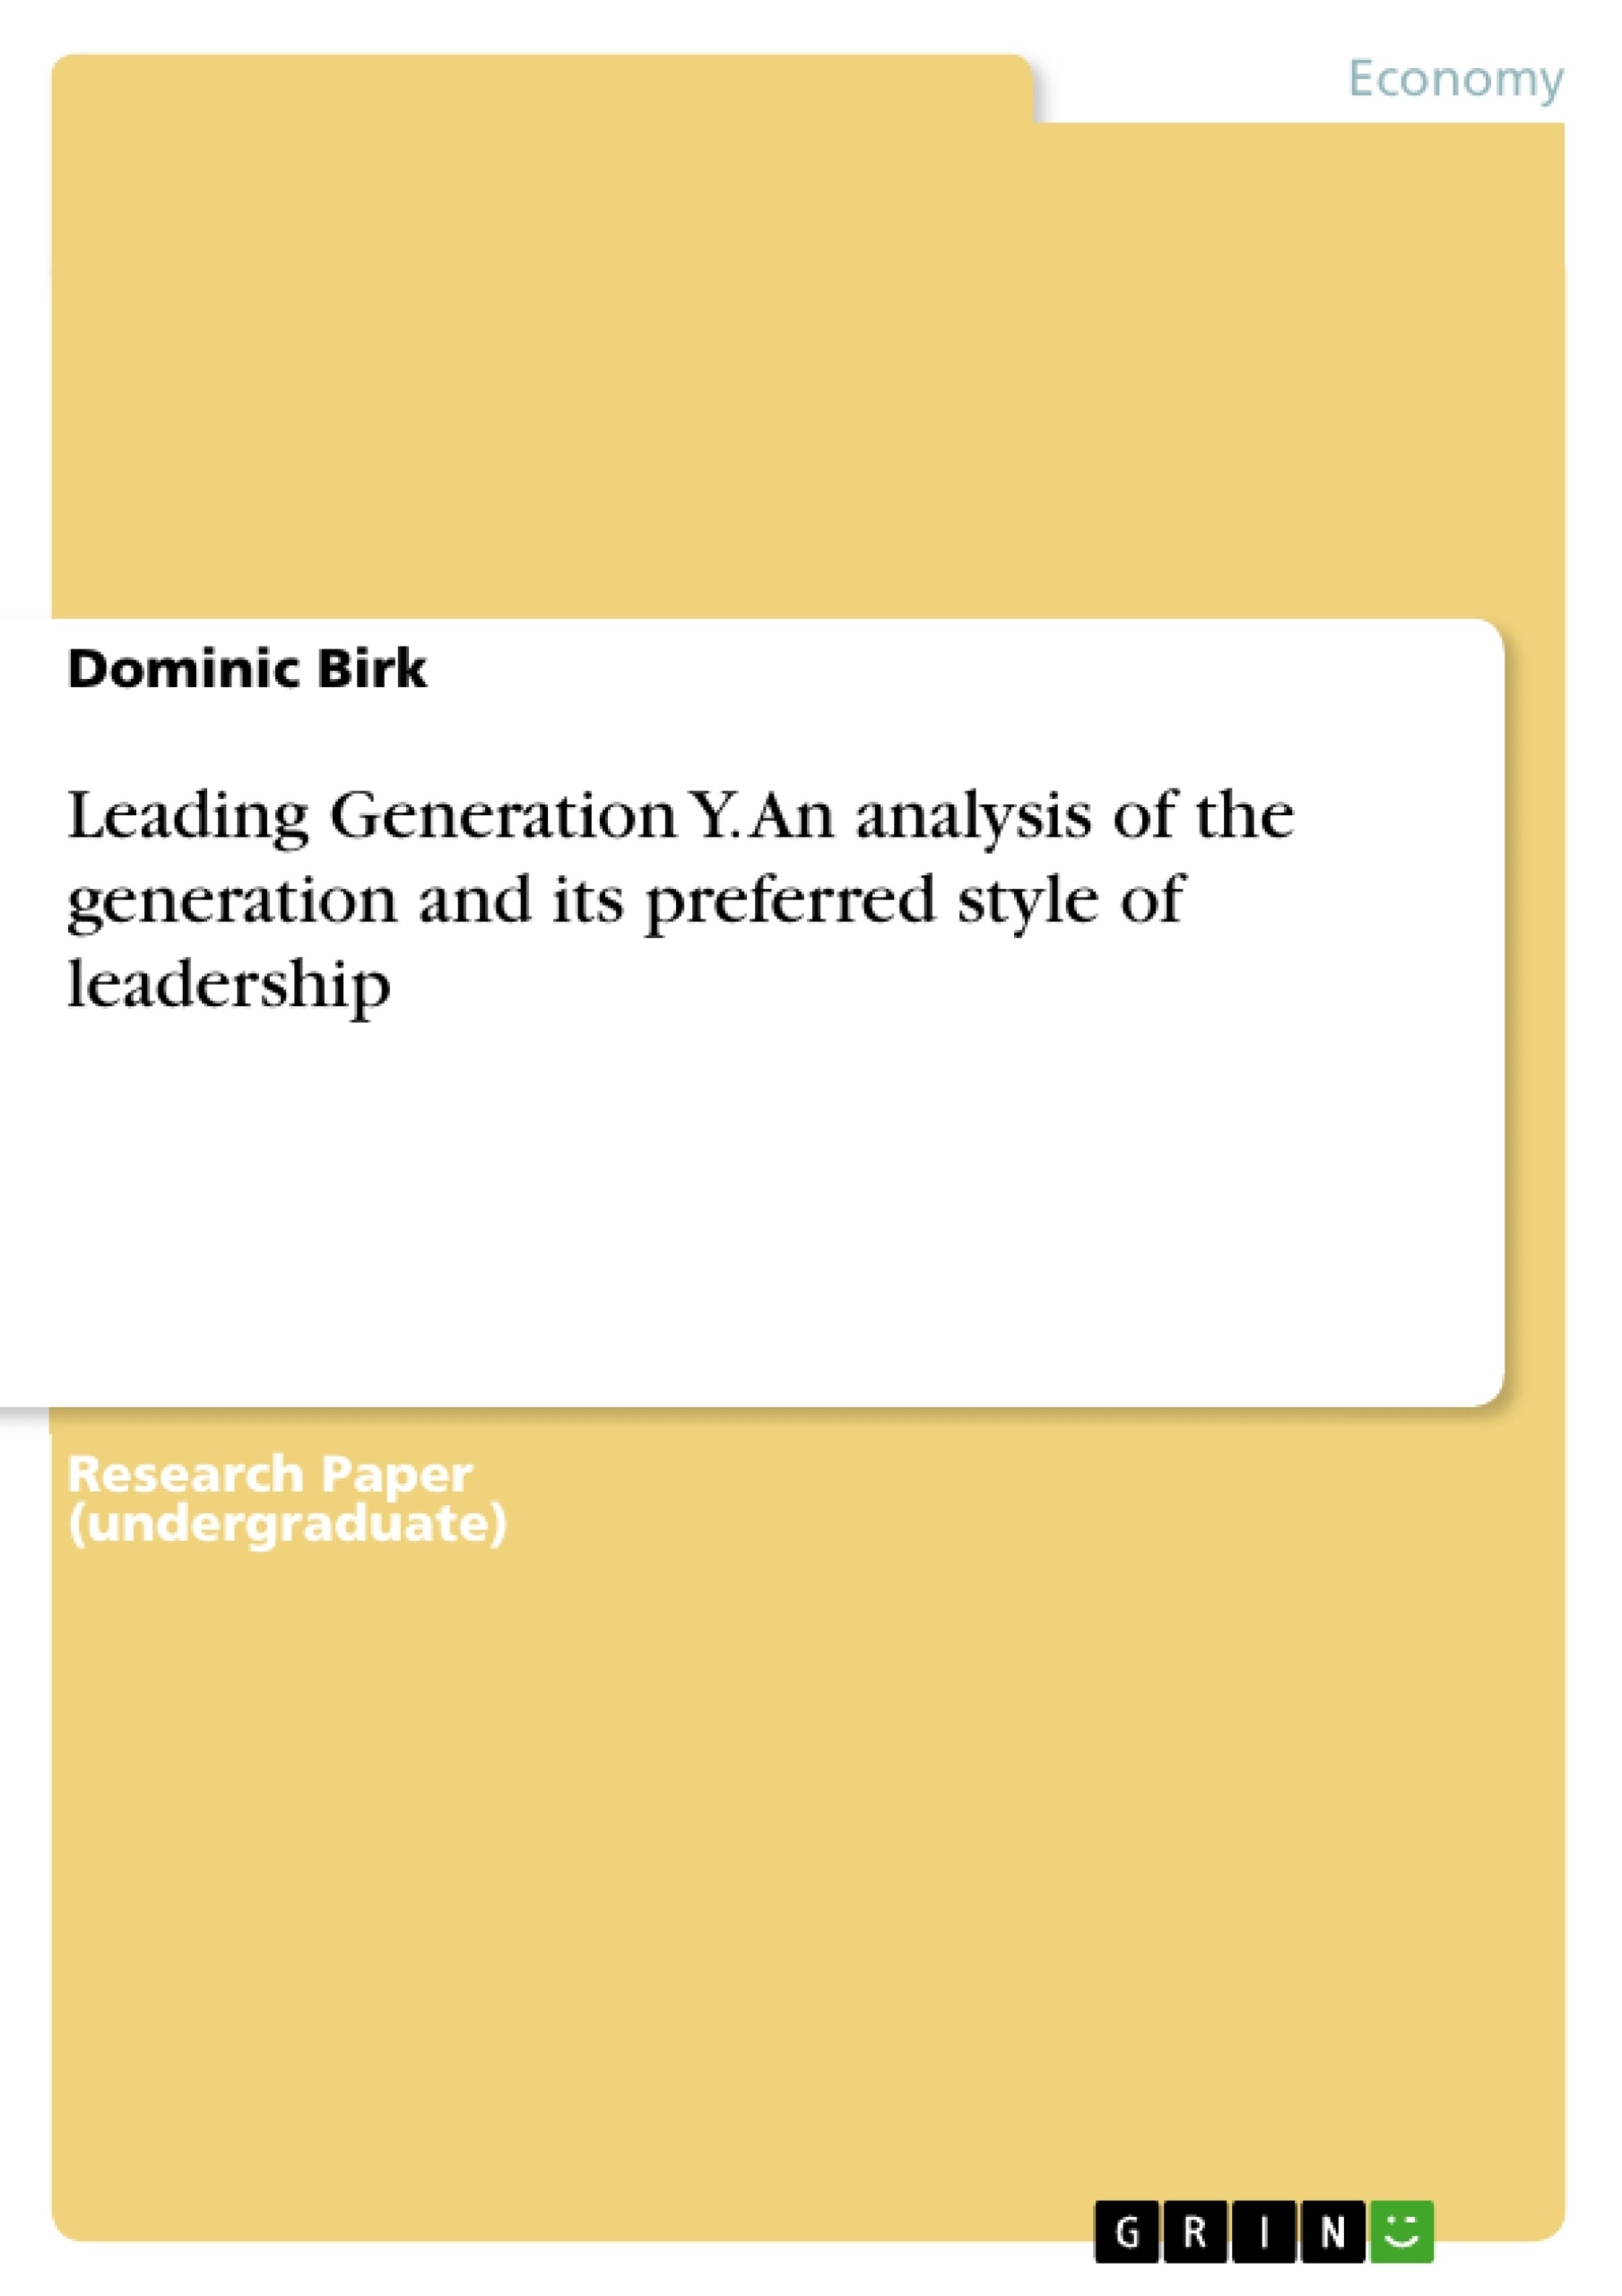 Titel: Leading Generation Y. An analysis of the generation and its preferred style of leadership